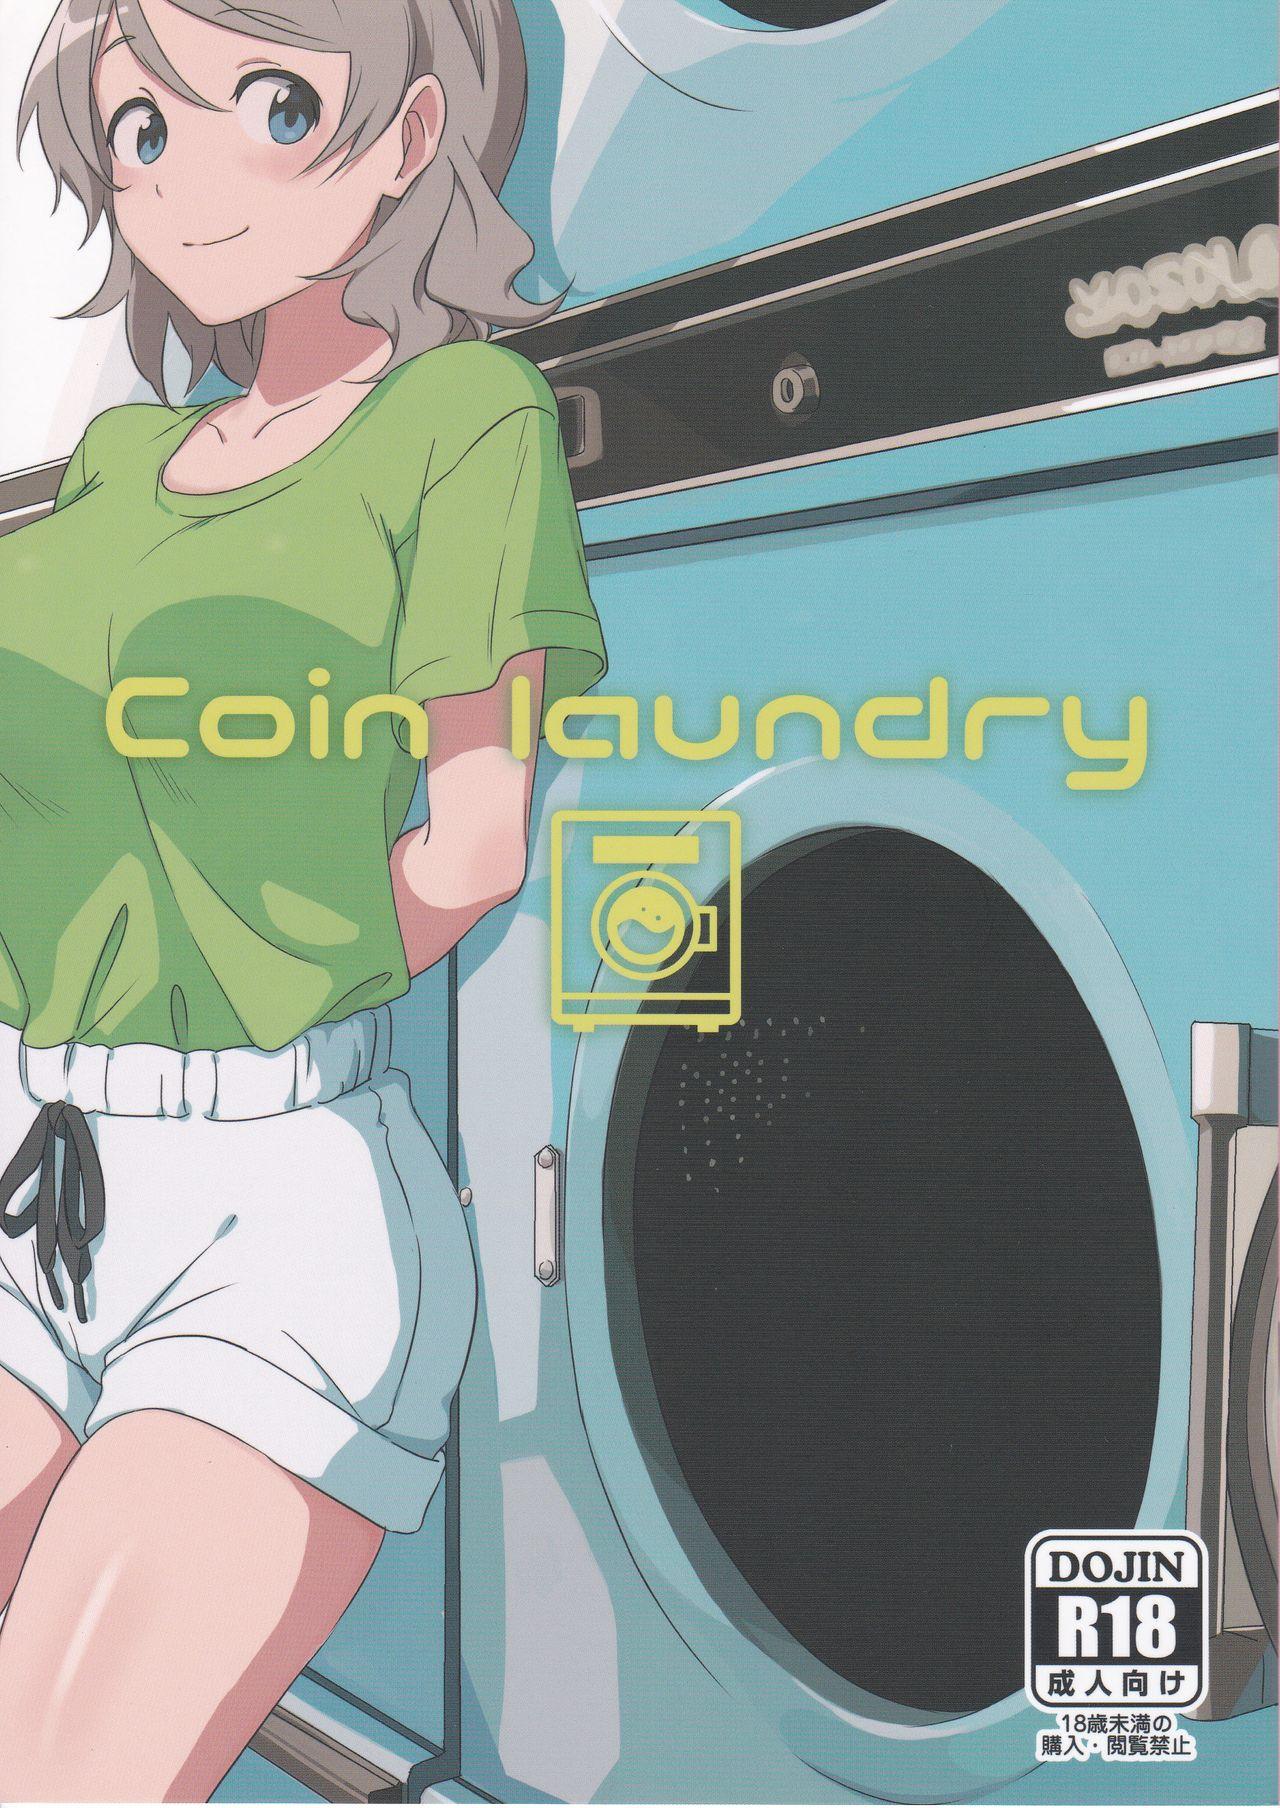 Coin laundry 0